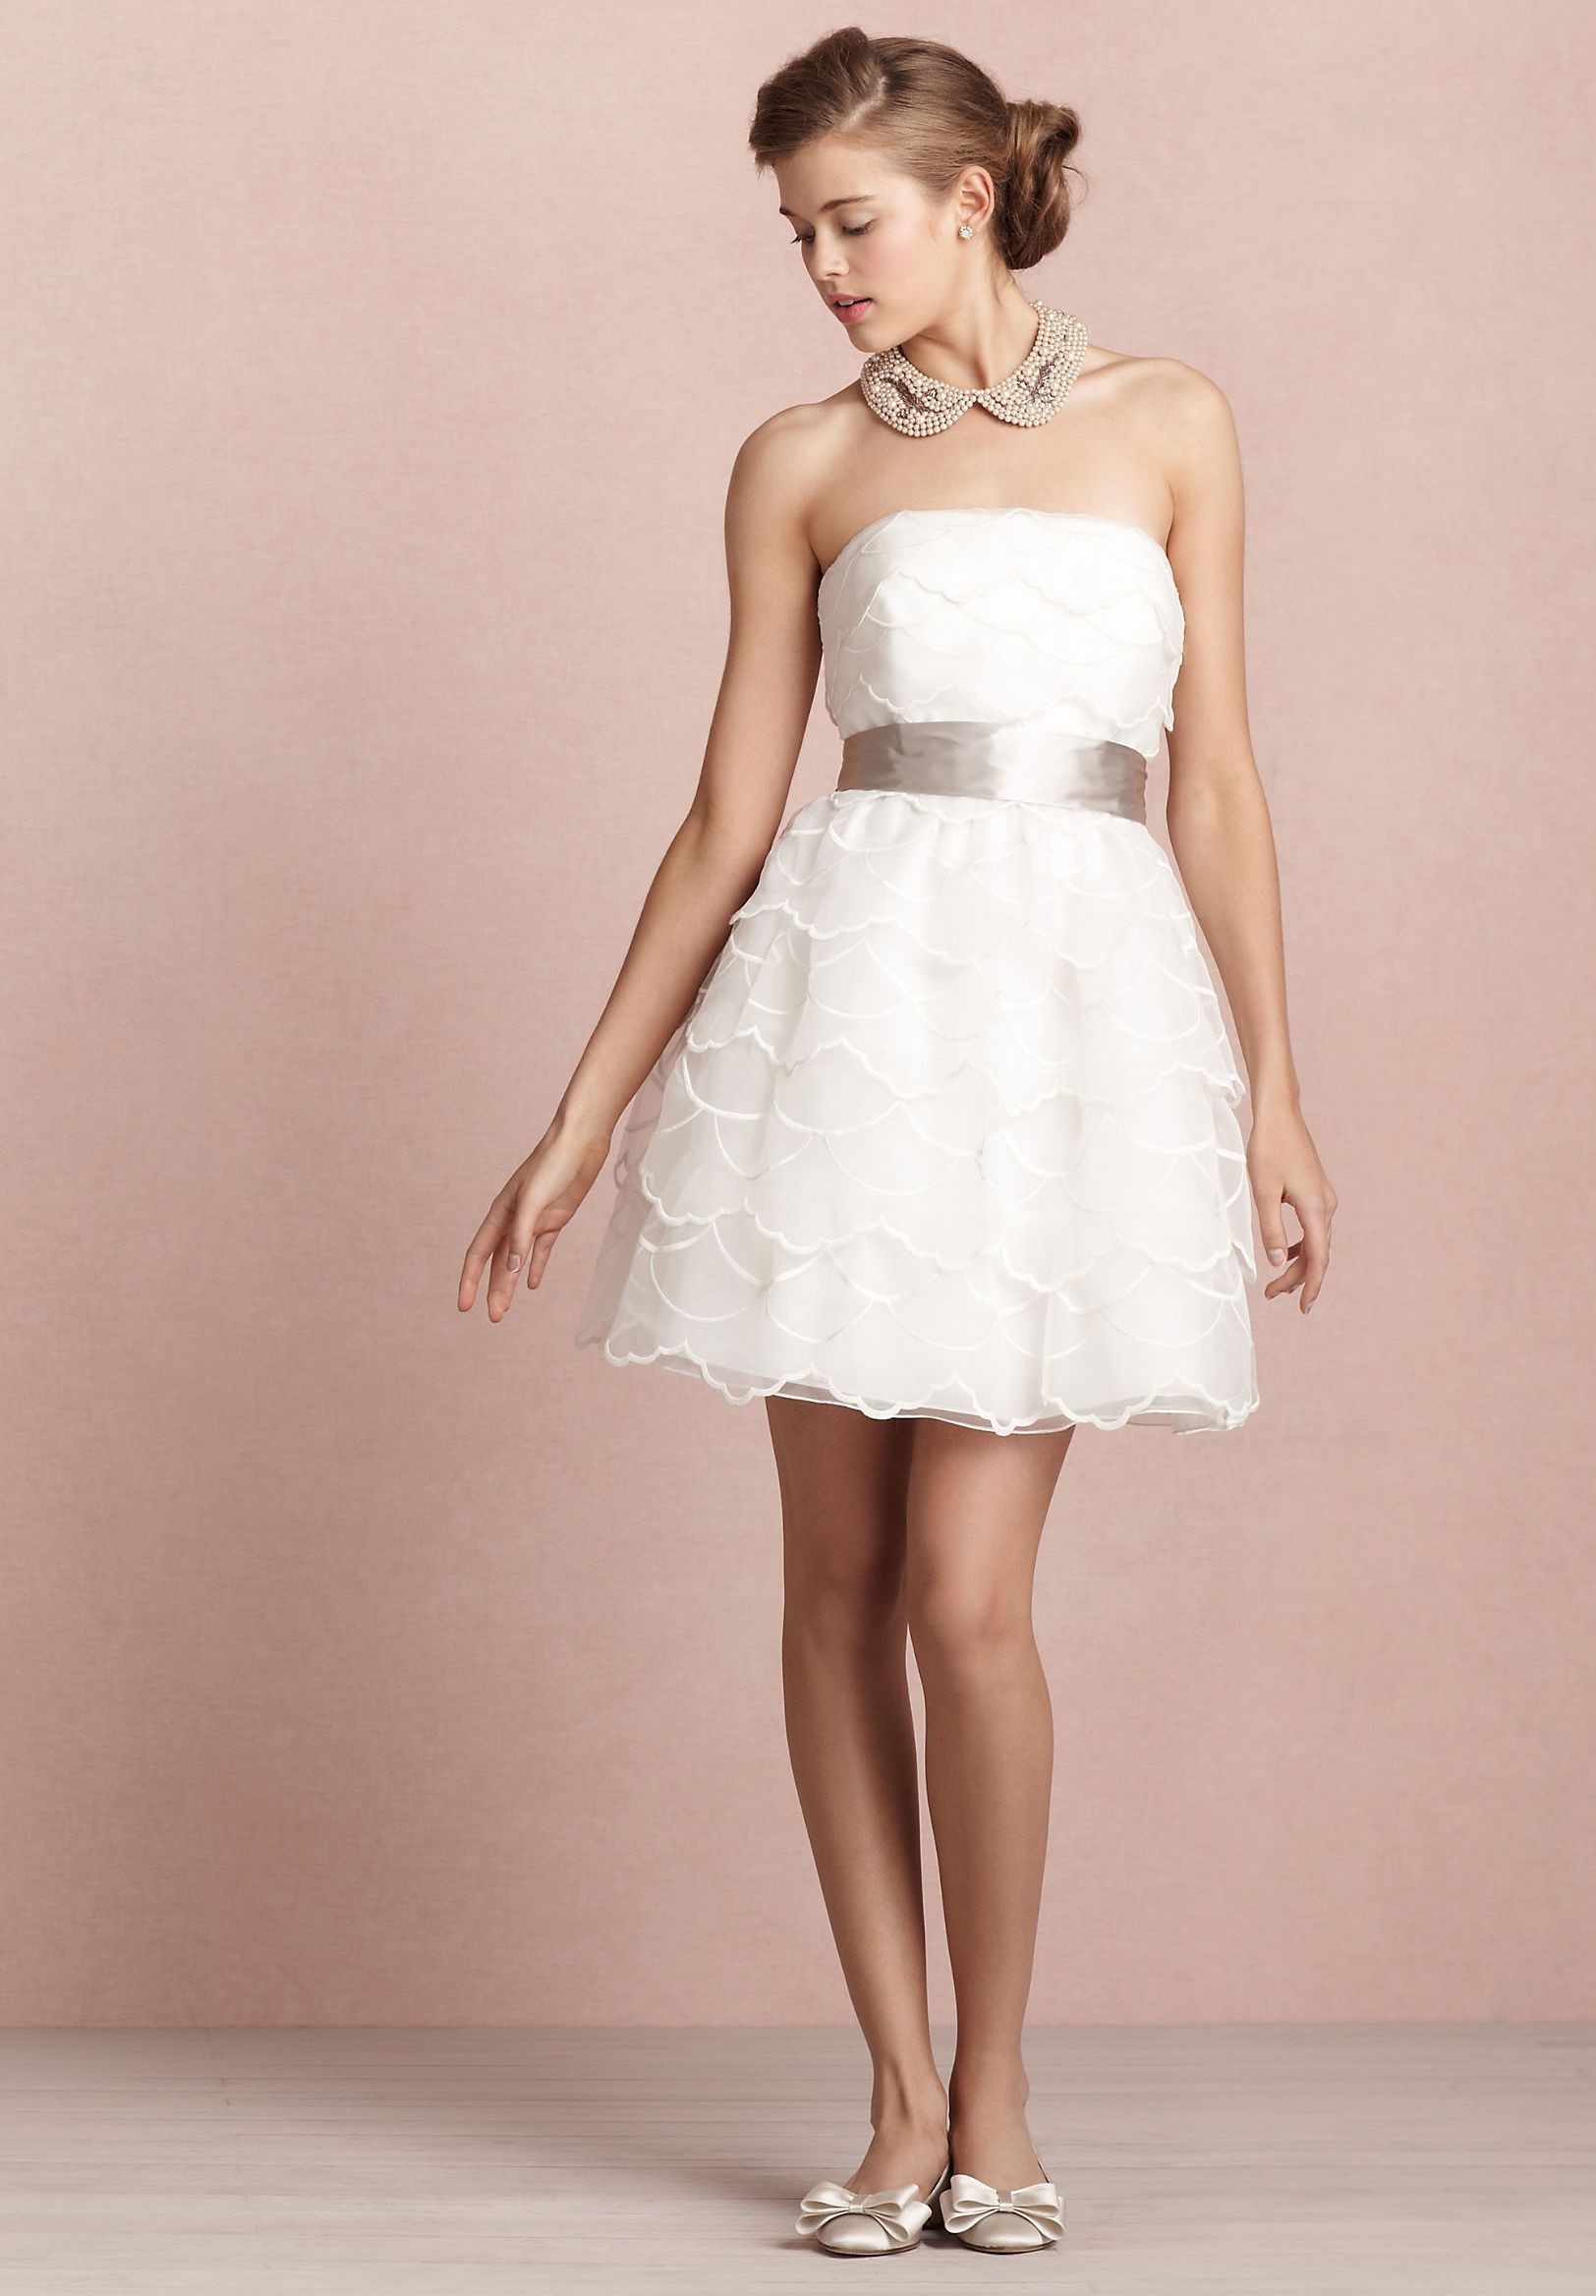 30 GORGEOUS RECEPTION DRESS FOR THE BRIDE TO BE ........